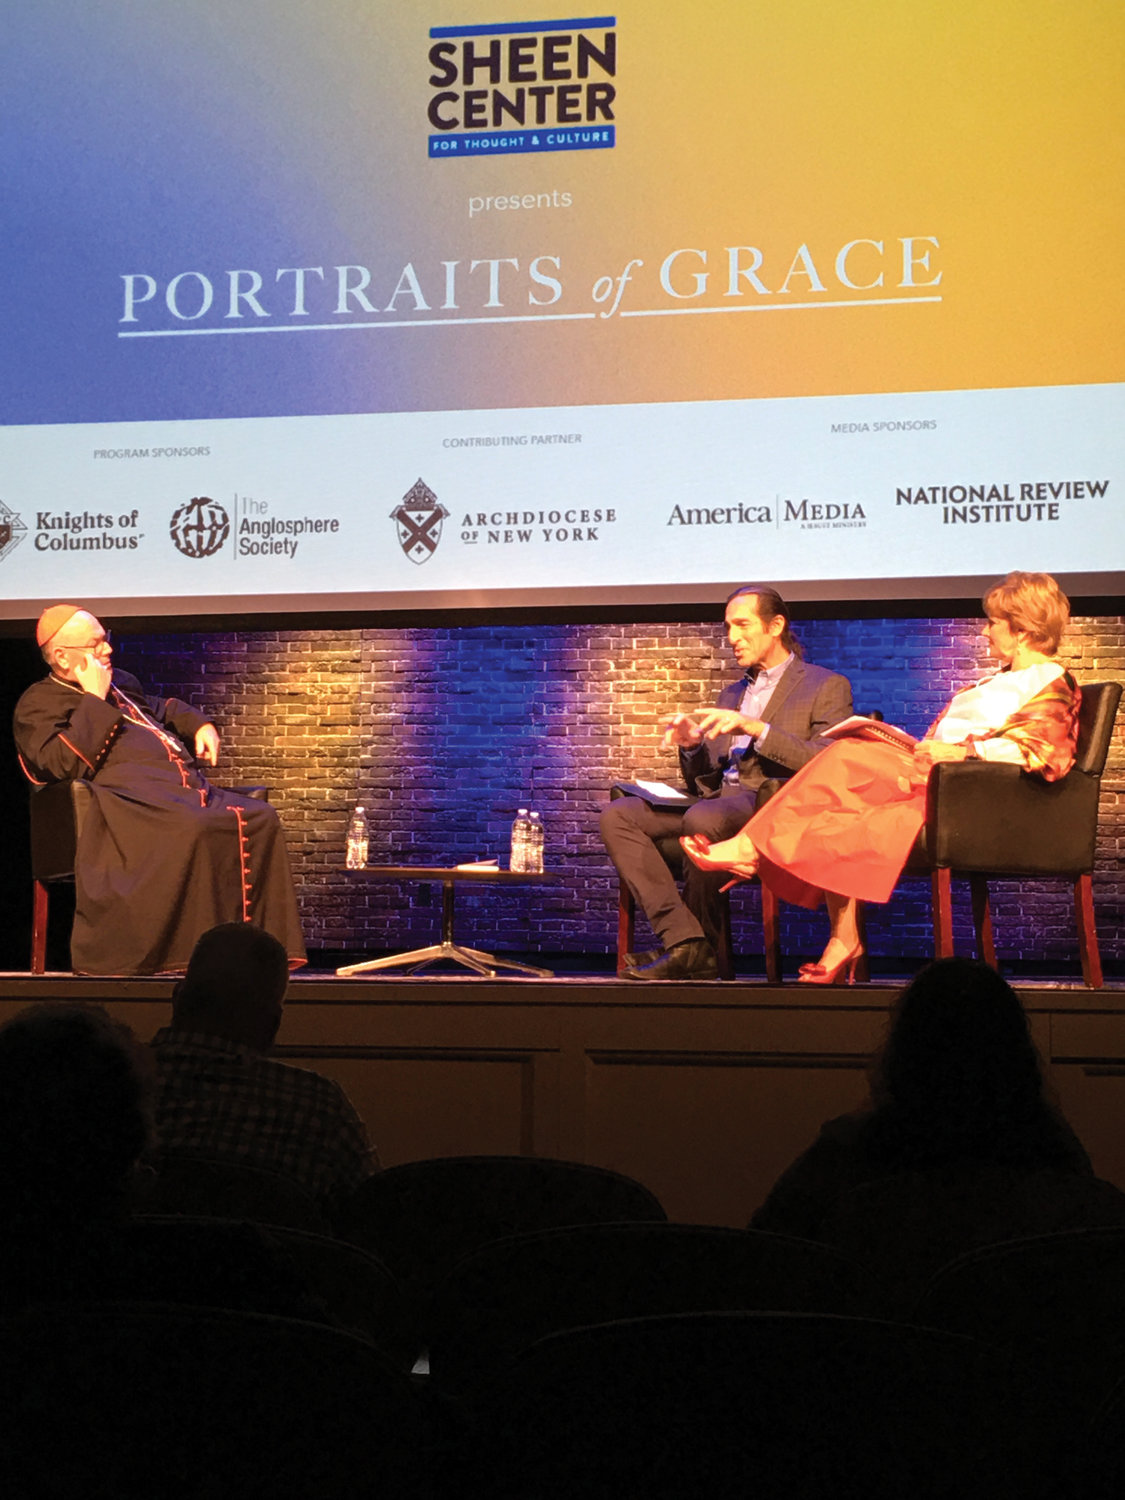 Cardinal Dolan took part in a discussion about the display in the center’s Loreto Theater. Jeffrey Bruno, photographer and curator of the exhibit, joined the discussion moderated by Amanda Bowman, Sheen Center board member.